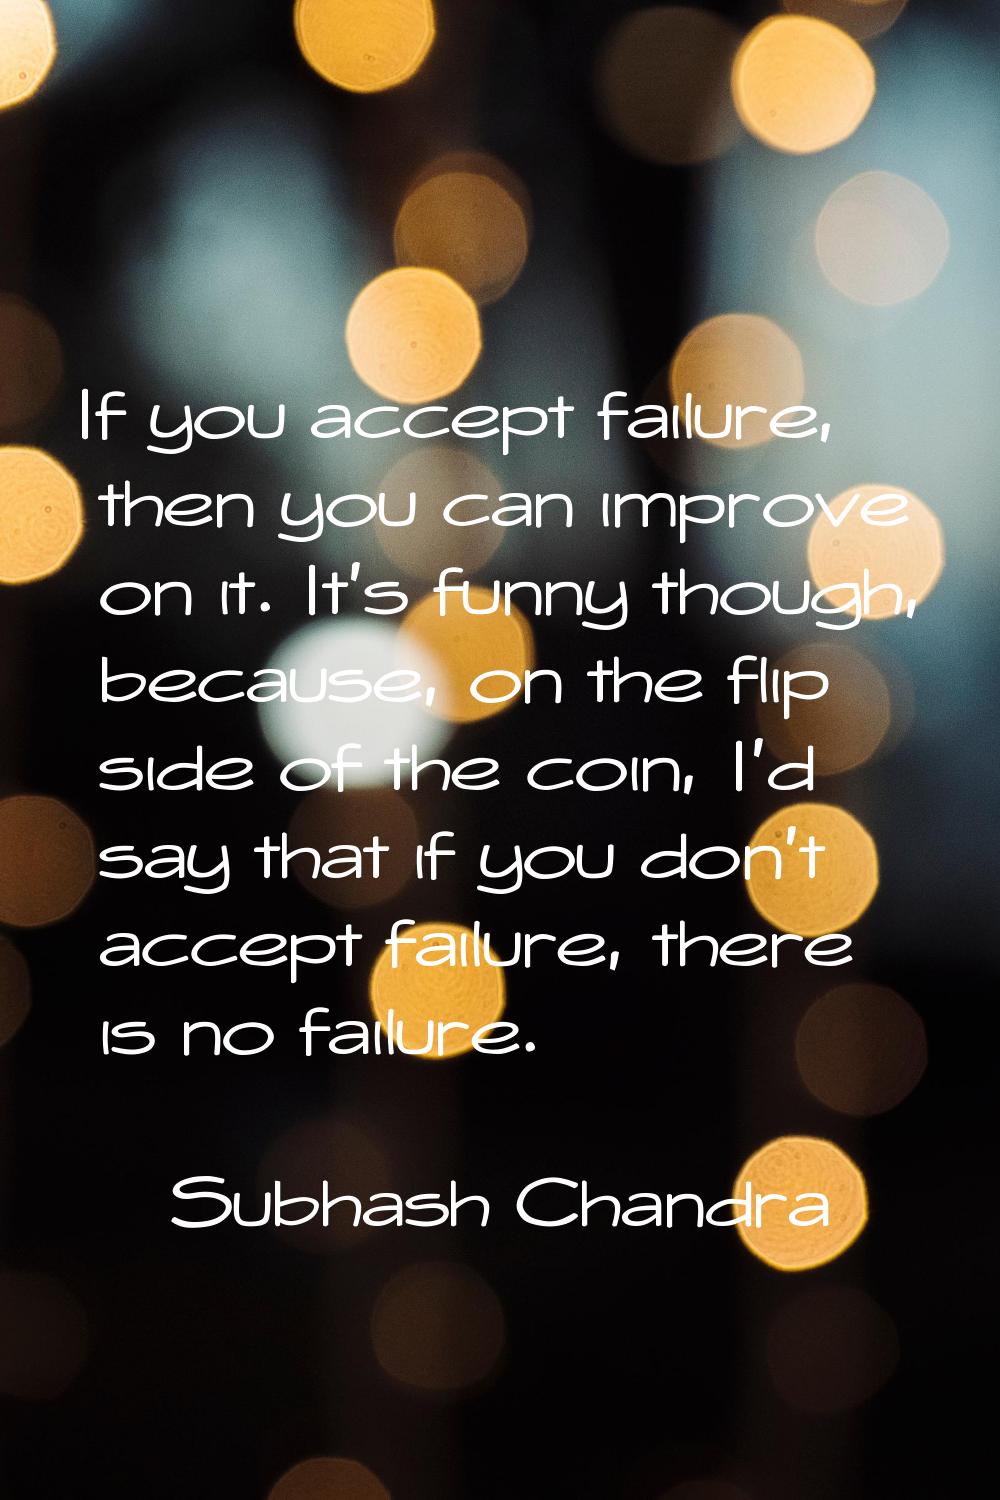 If you accept failure, then you can improve on it. It's funny though, because, on the flip side of 